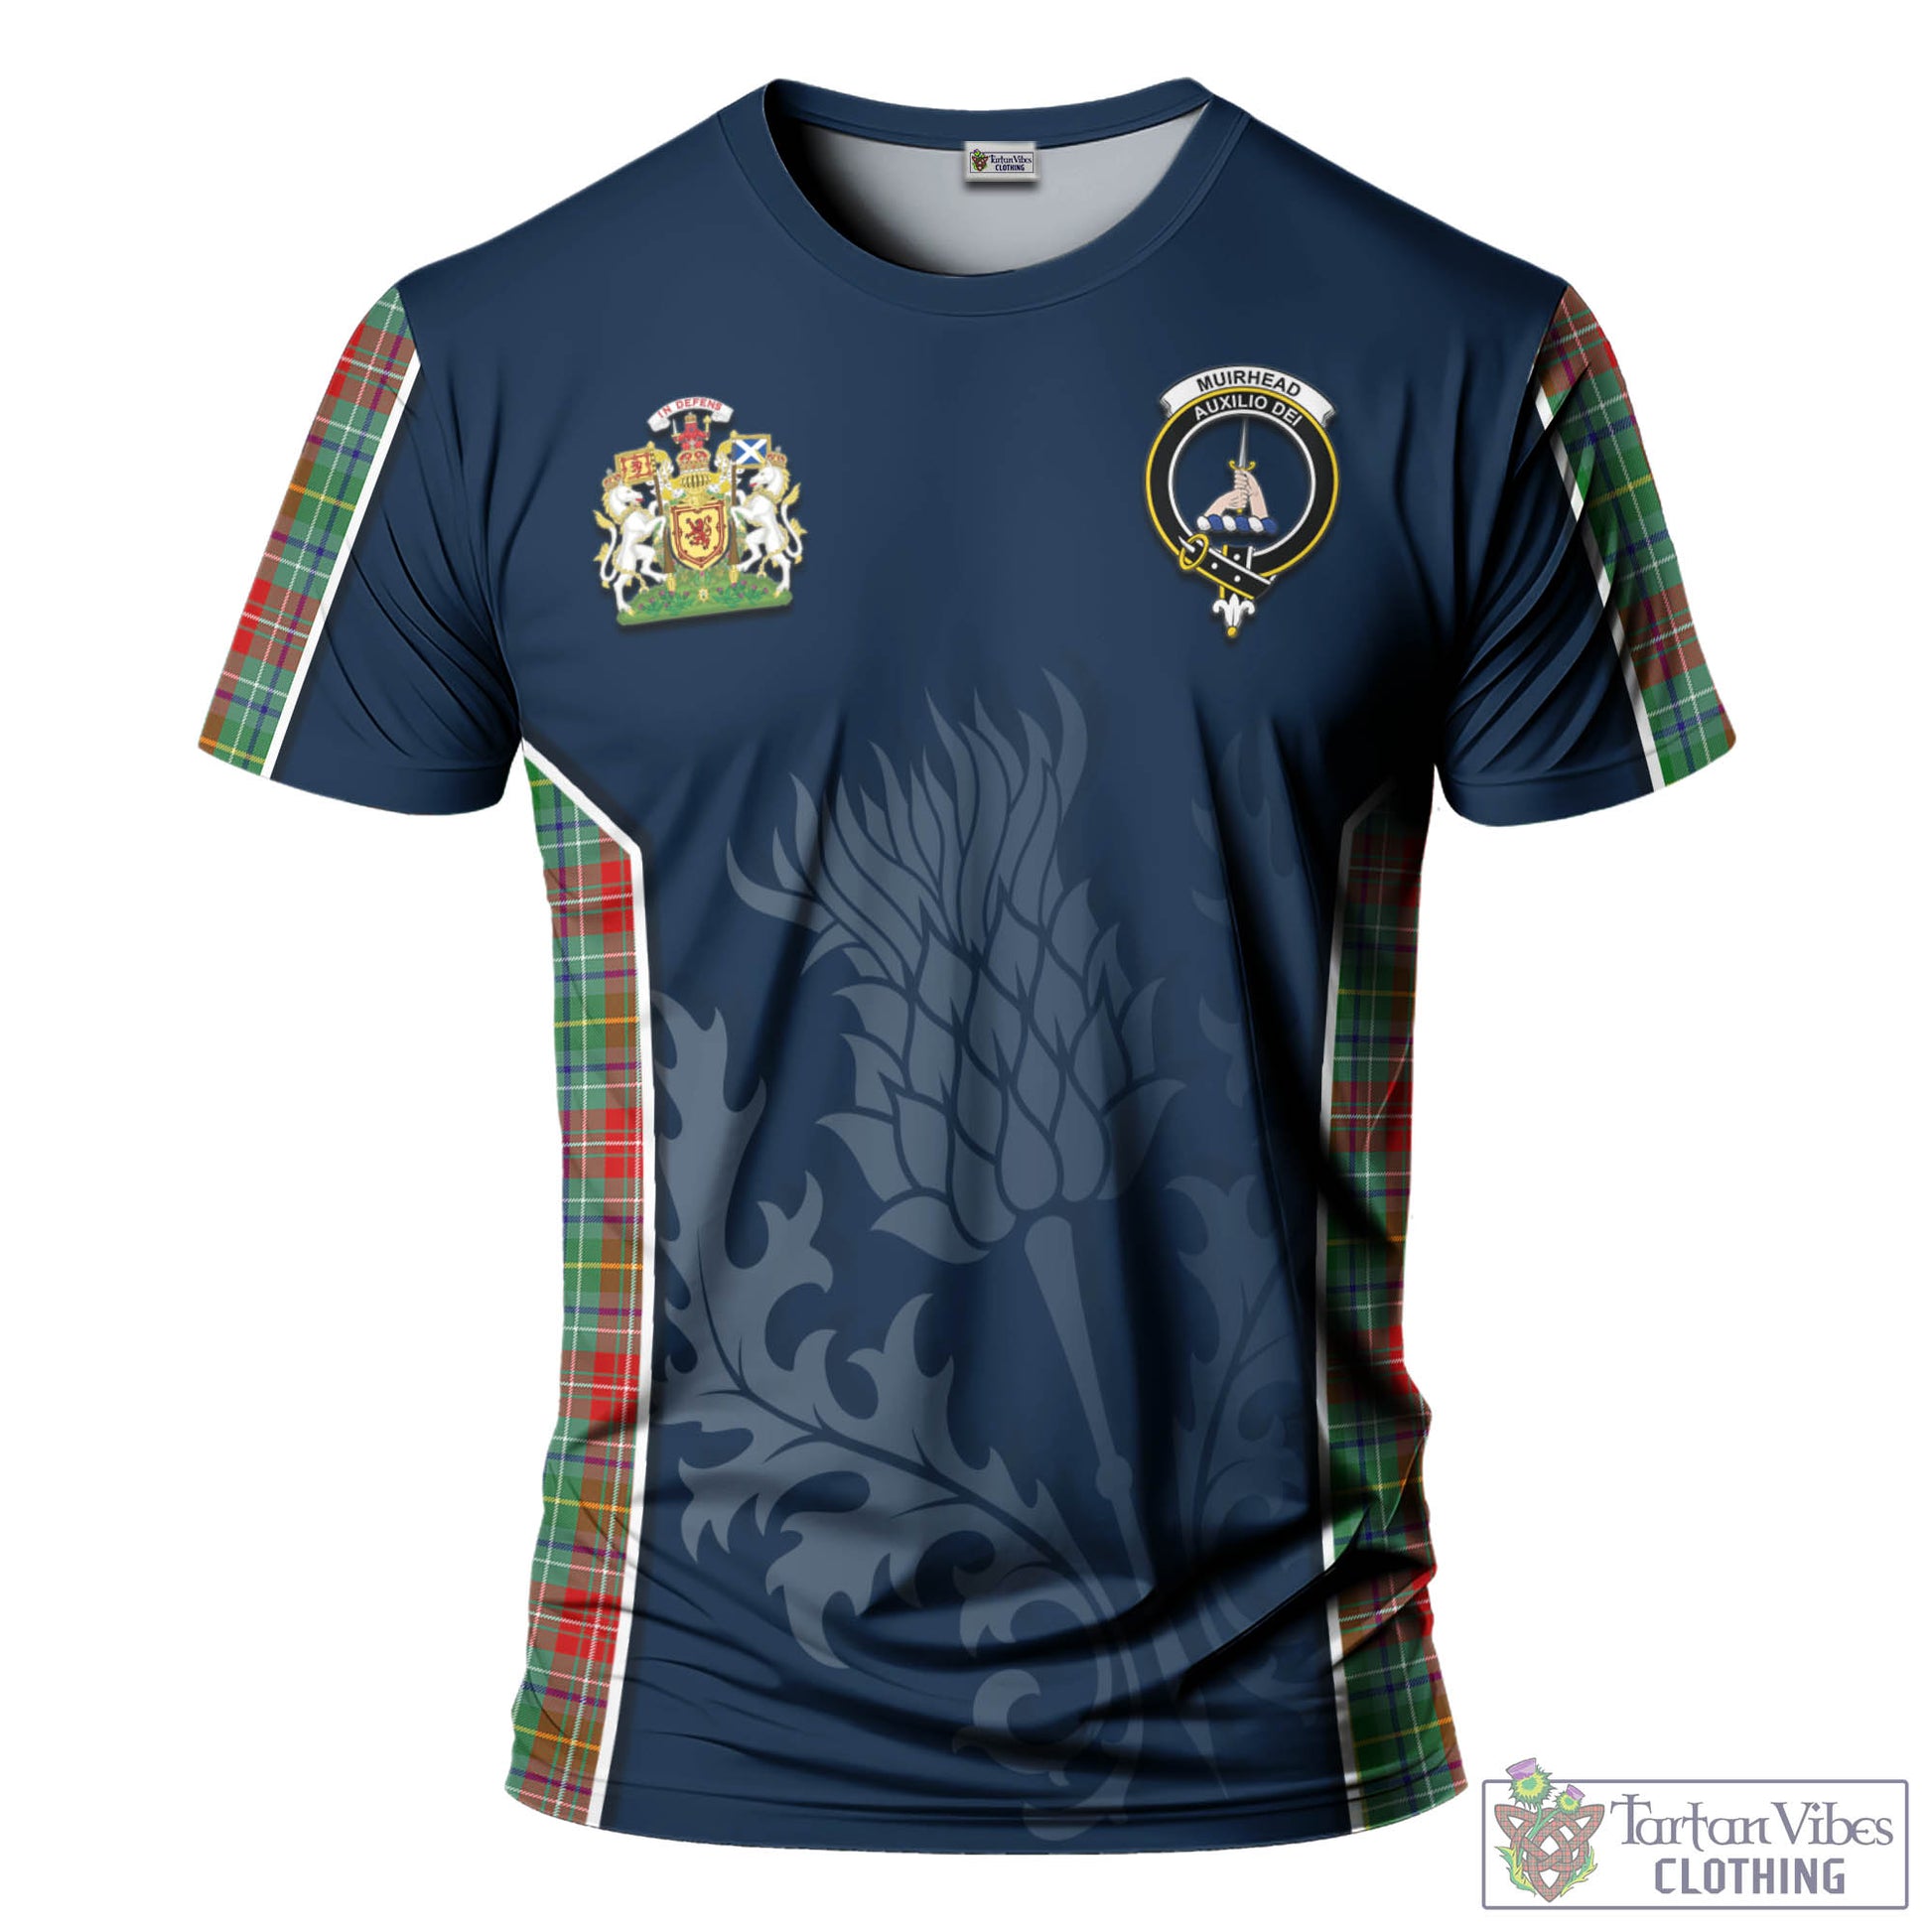 Tartan Vibes Clothing Muirhead Tartan T-Shirt with Family Crest and Scottish Thistle Vibes Sport Style